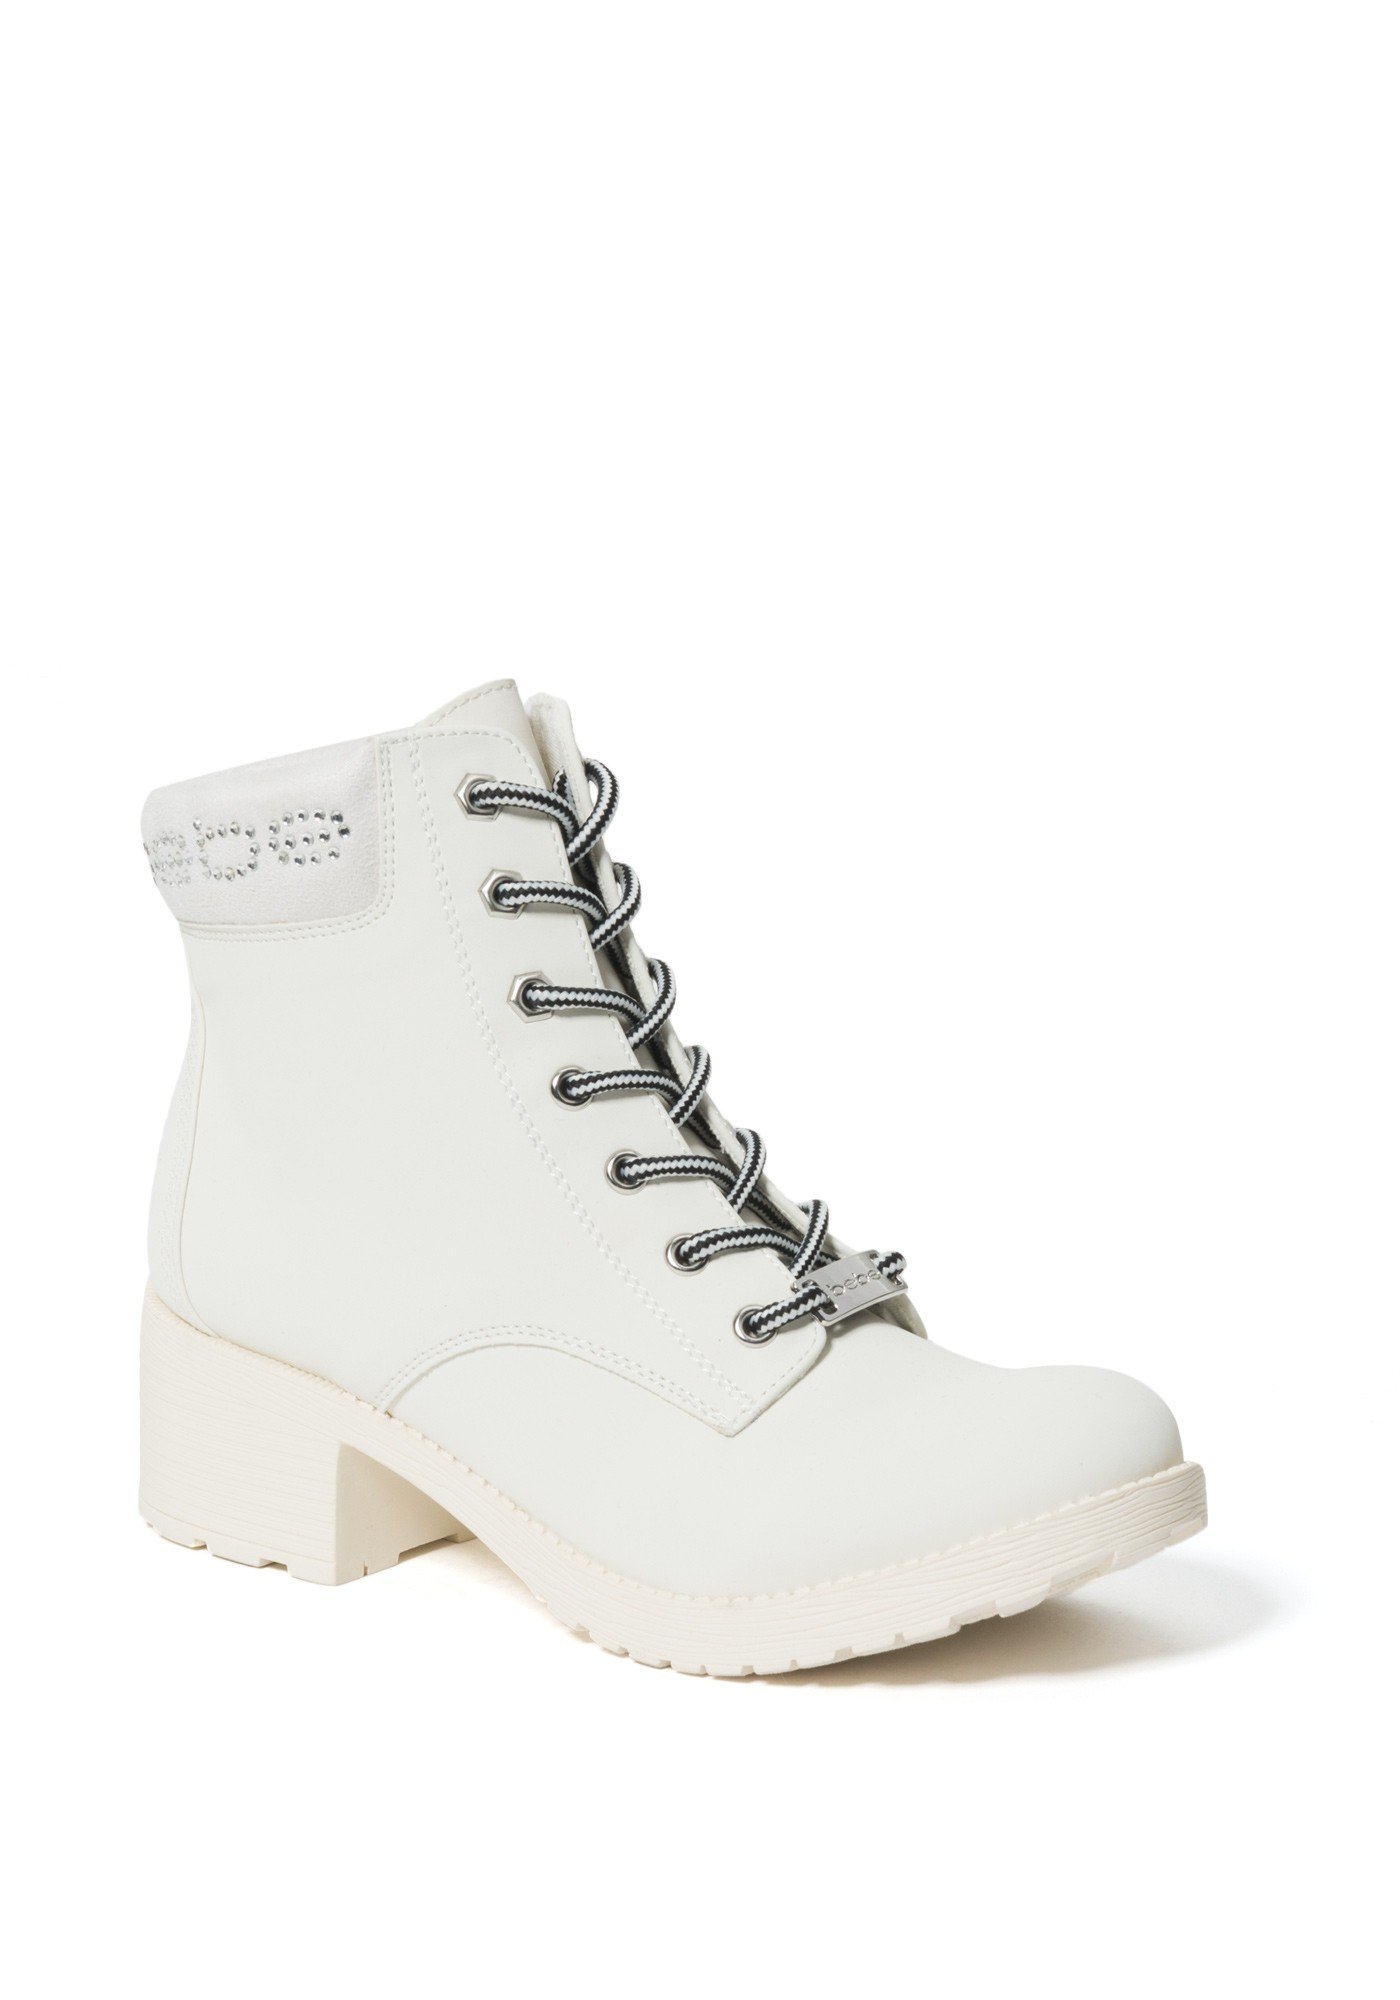 Bebe Women's Shaylie Logo Ankle Boots, Size 11 in White Synthetic